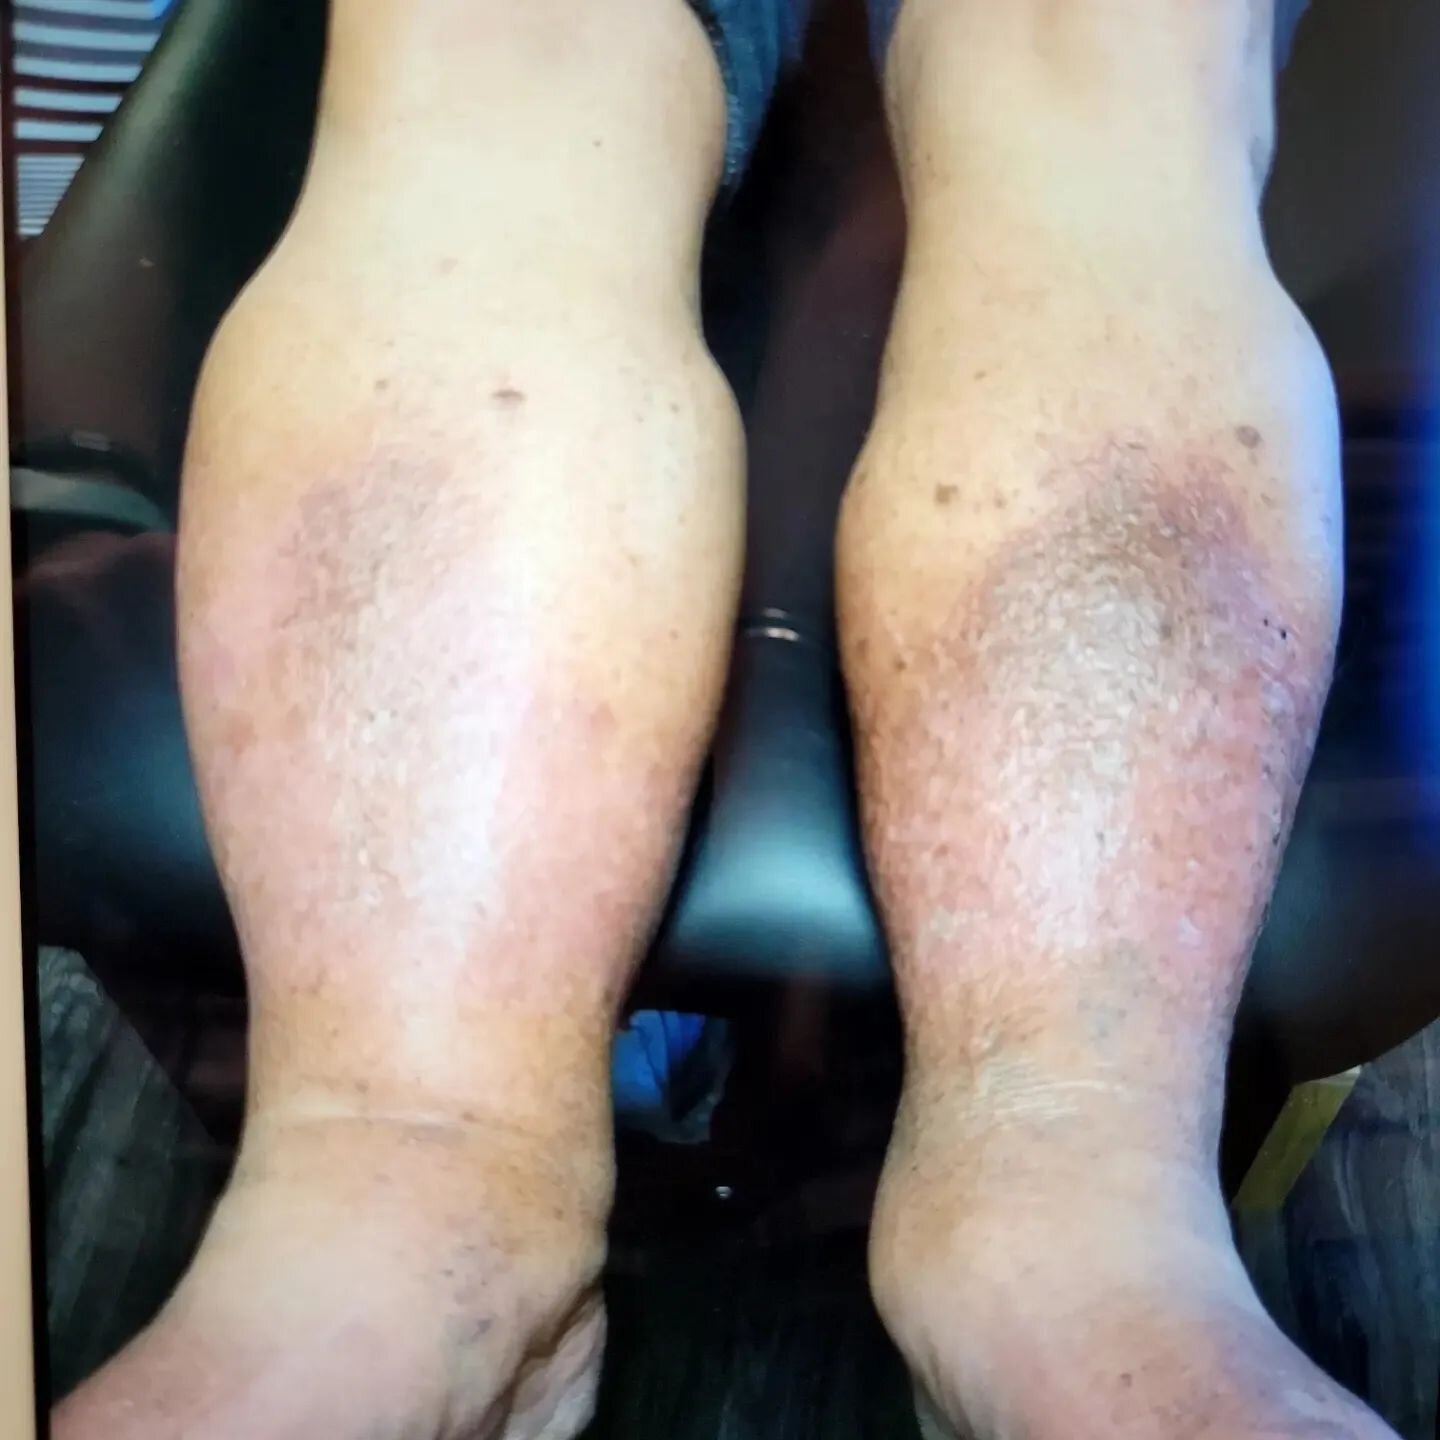 Do you or someone you love have swelling in their legs? We can help! Give us a call today 423-545-9544 to learn how to improve swelling and quality of life!

#jenmobilityrehab 
#lymphedema